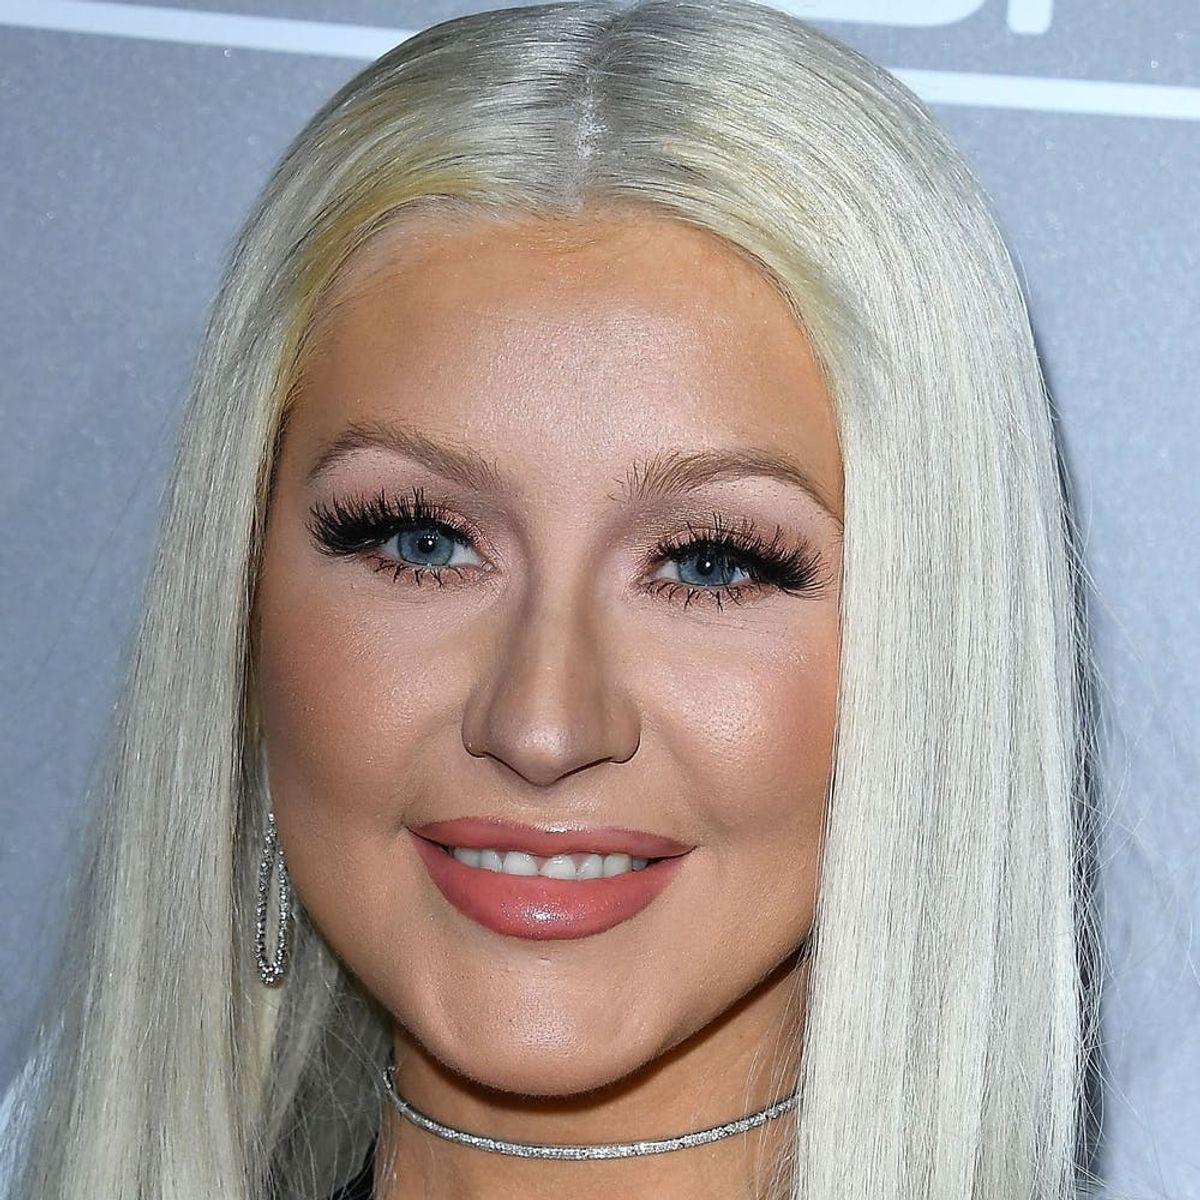 You’ll Hardly Recognize a Makeup-Free Christina Aguilera on the Cover of ‘Paper’